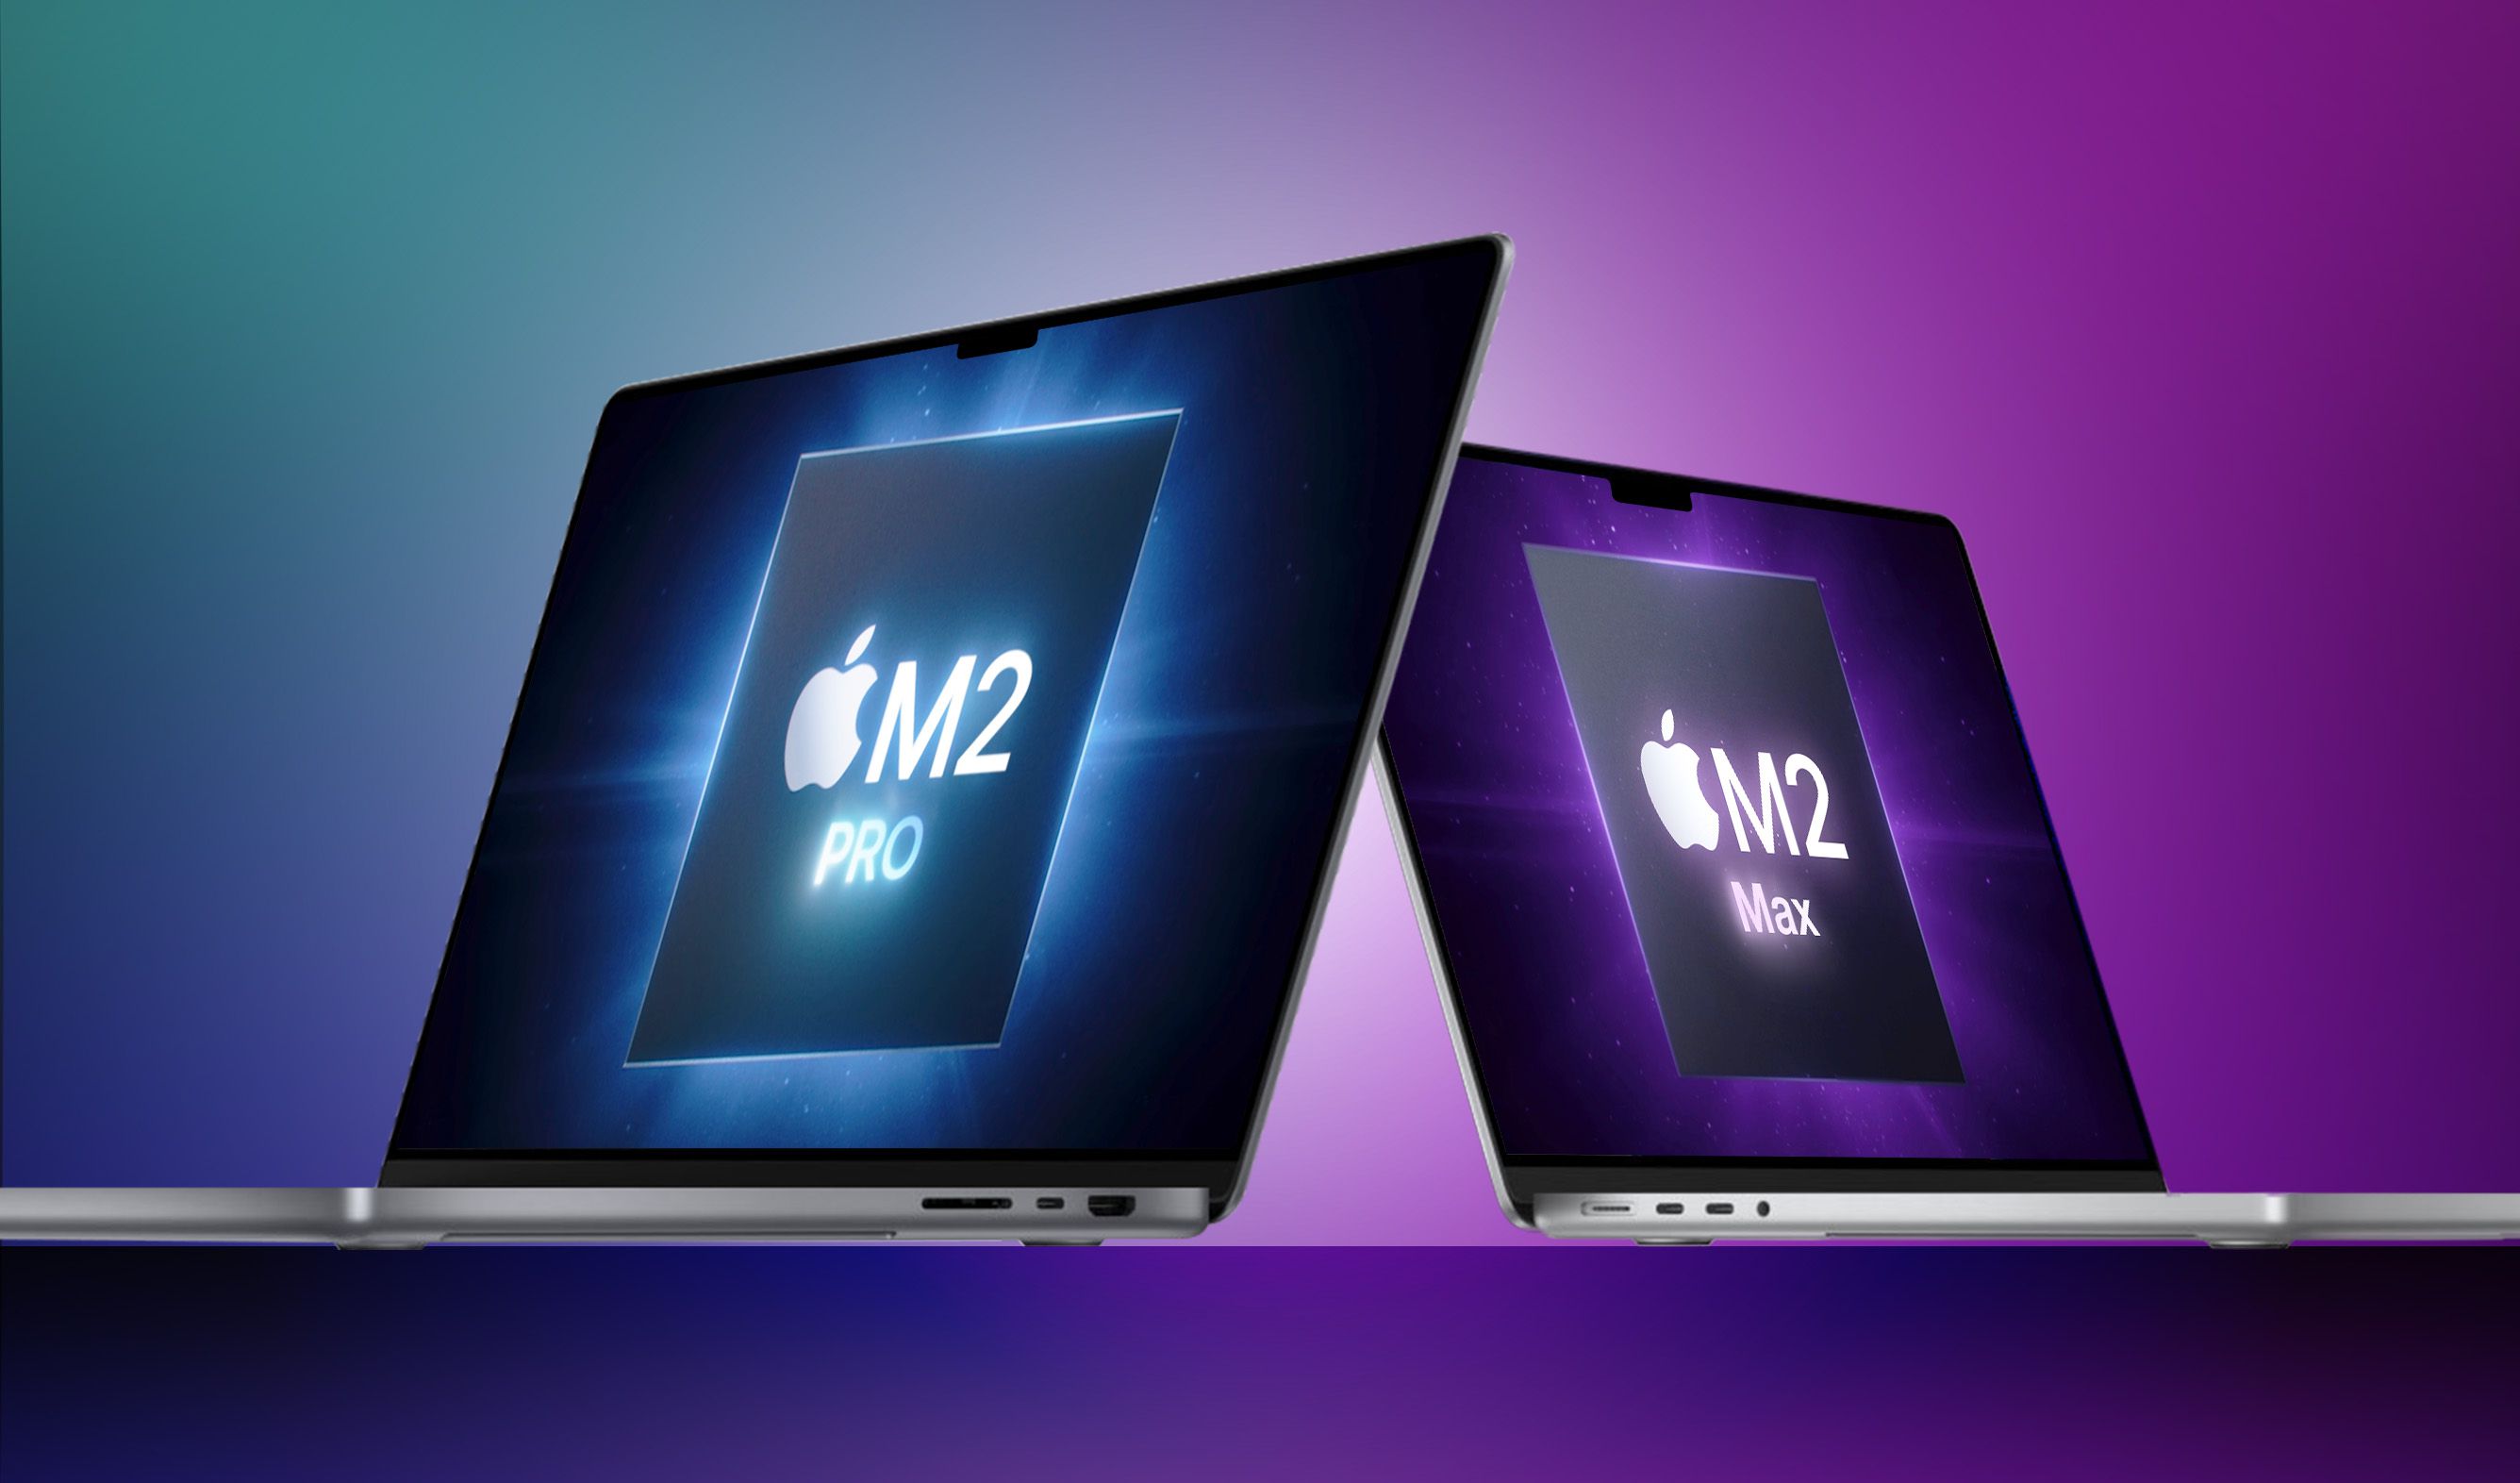 'M2 Max' Geekbench Scores Surface Again Online Ahead of Release in 2023 - MacRumors : Last month, Geekbench scores for an unannounced Mac running the upcoming M2 Max chip surfaced online, showing only minor performance increases...  | Tranquility 國際社群